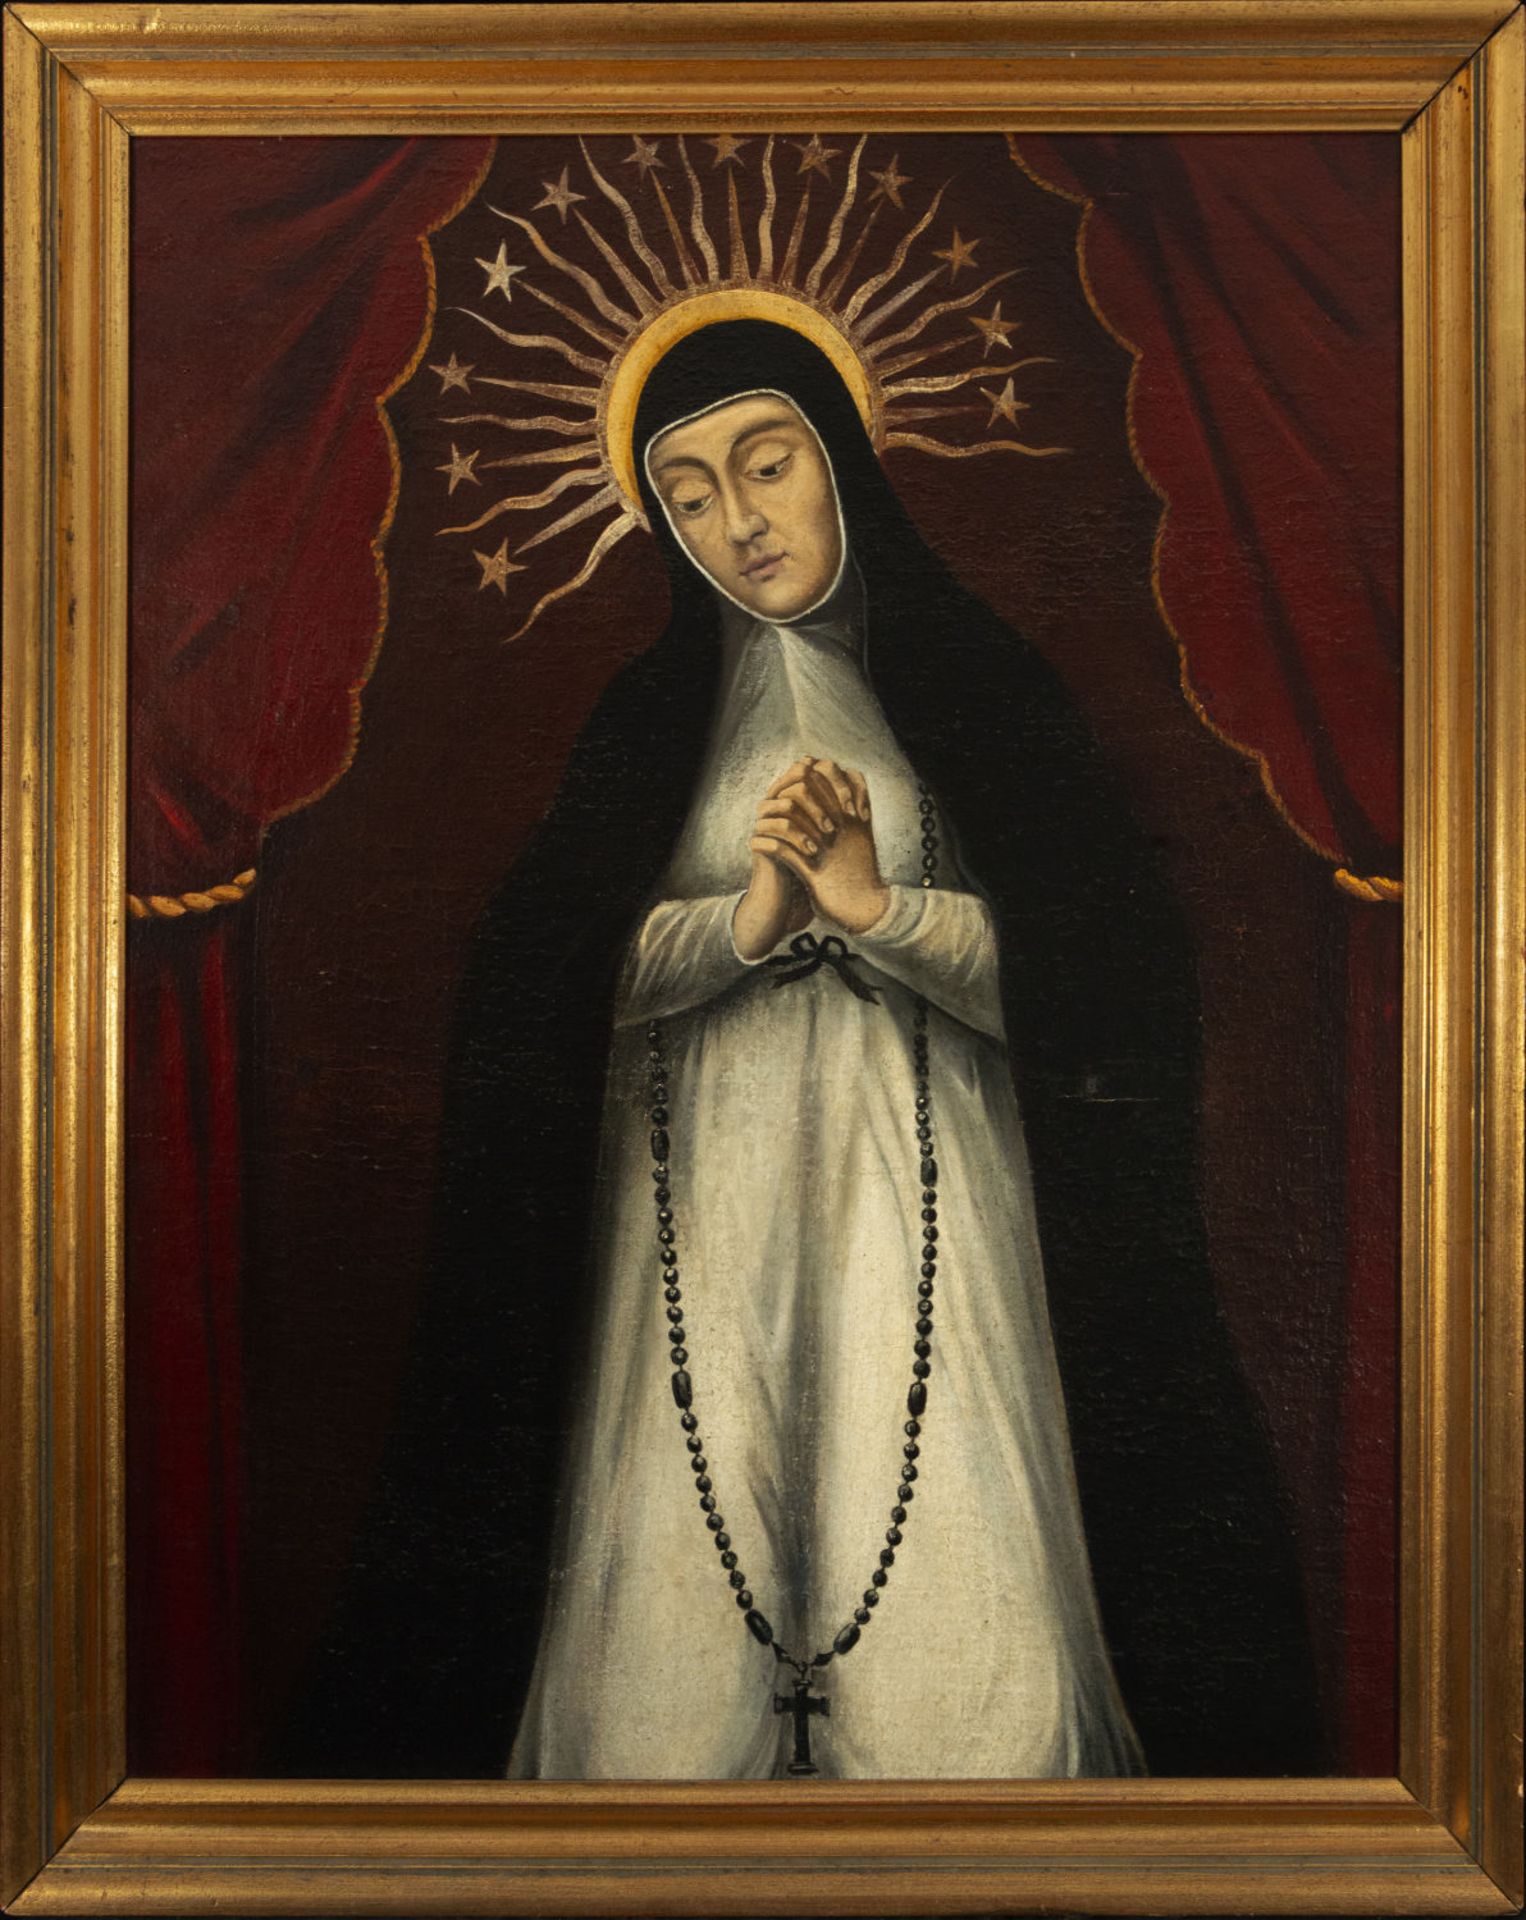 Large Virgin of Angustias, colonial school of Viceregal de Lima from the 17th century